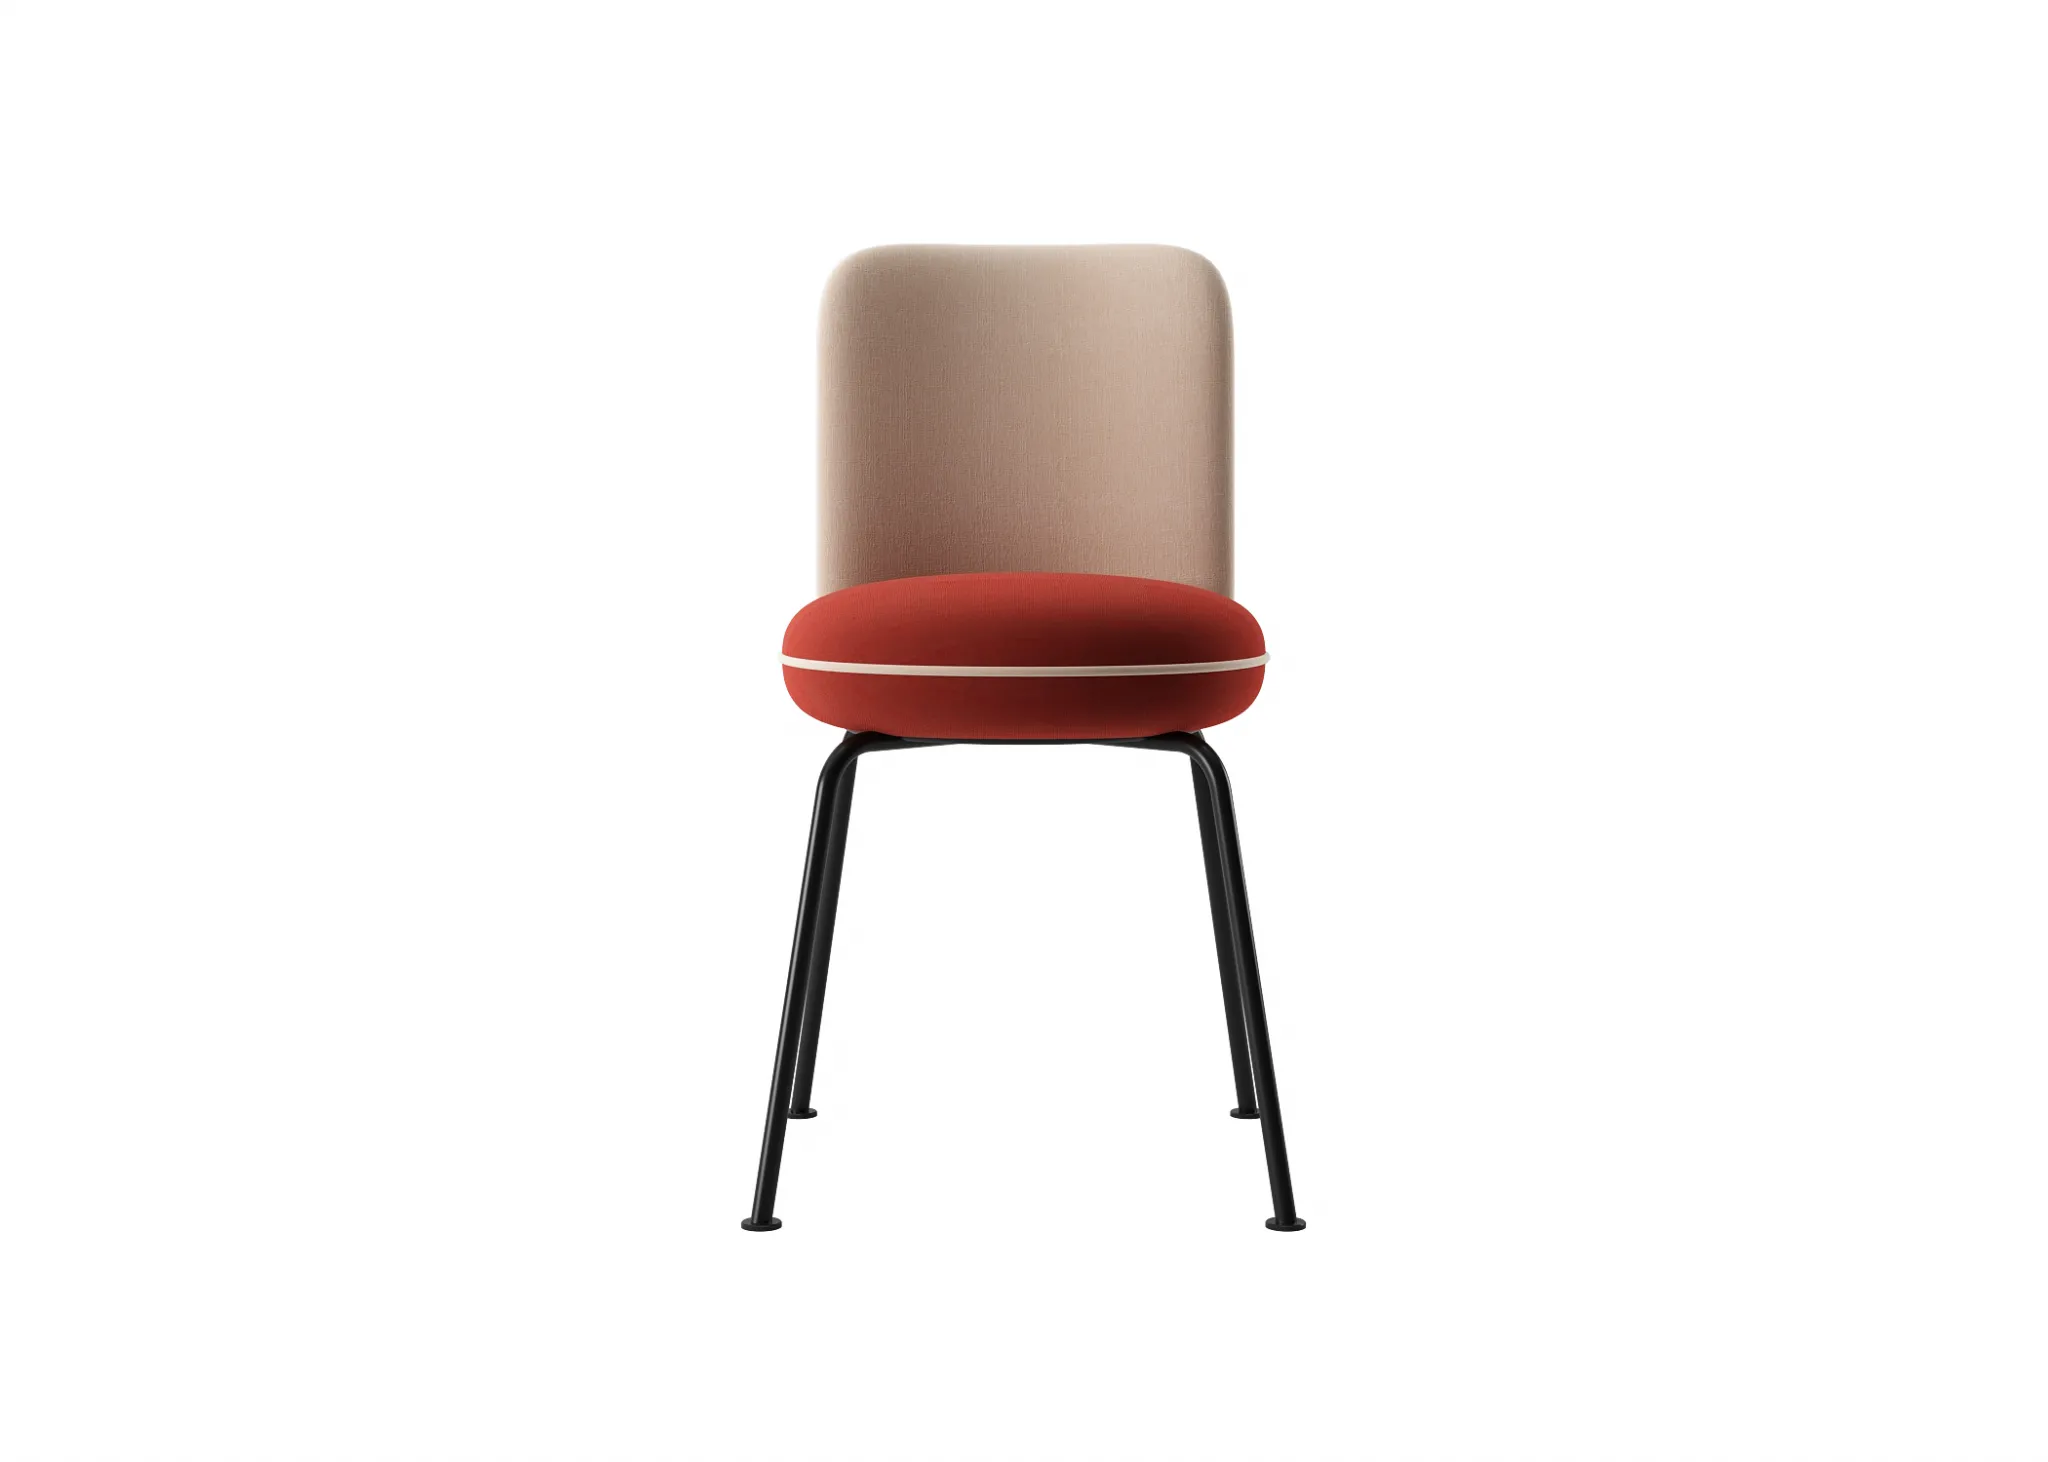 FURNITURE 3D MODELS – CHAIRS – 0371